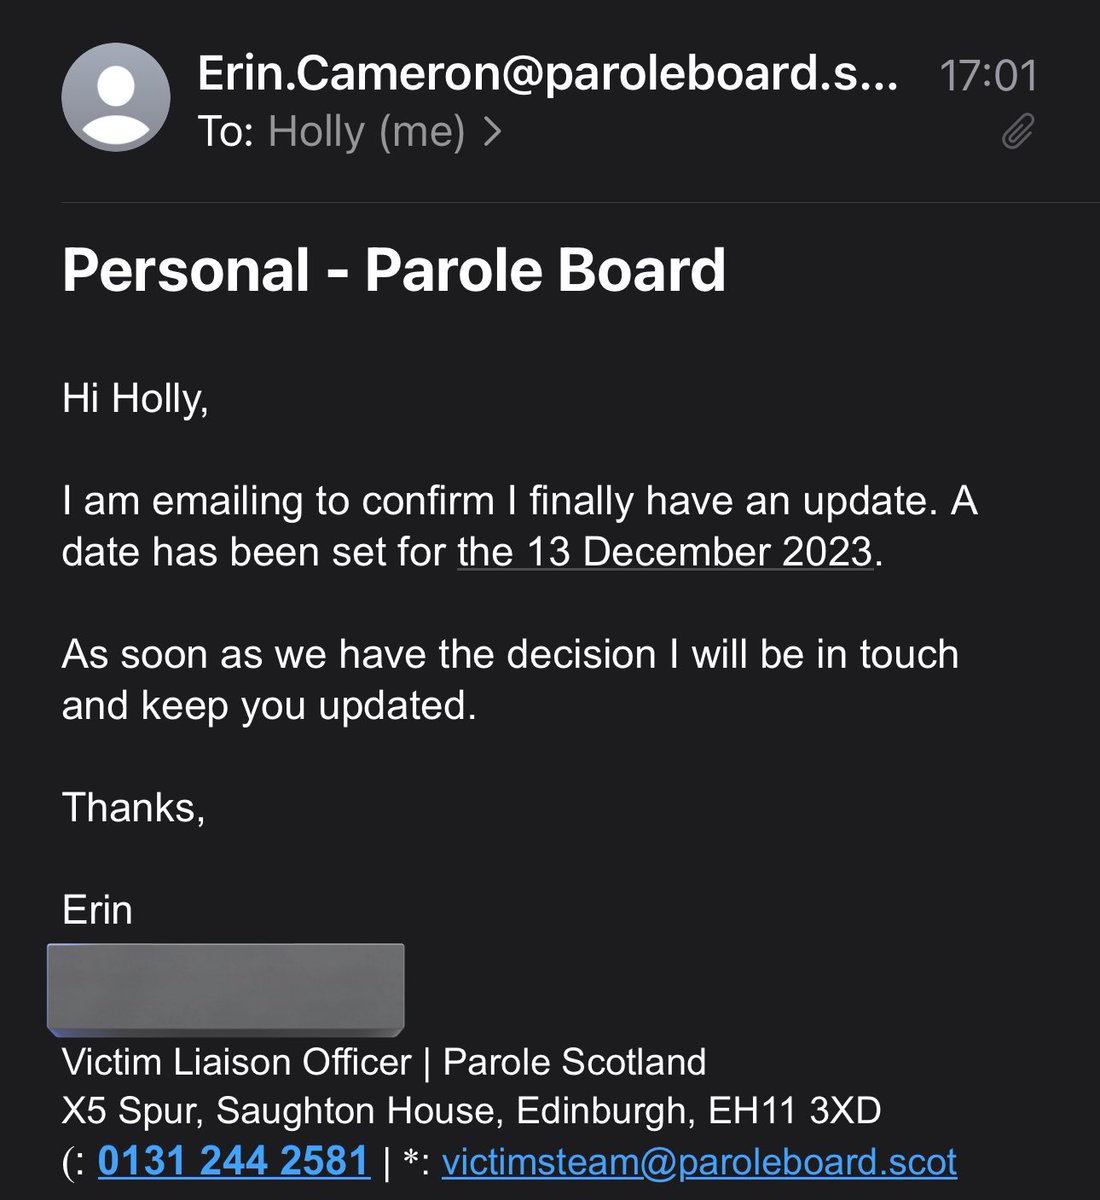 Round 3 here we go, unfortunately Gordon Collins is now at the 3/4 mark year 7/10 so I feel like this parole will be successful this year.